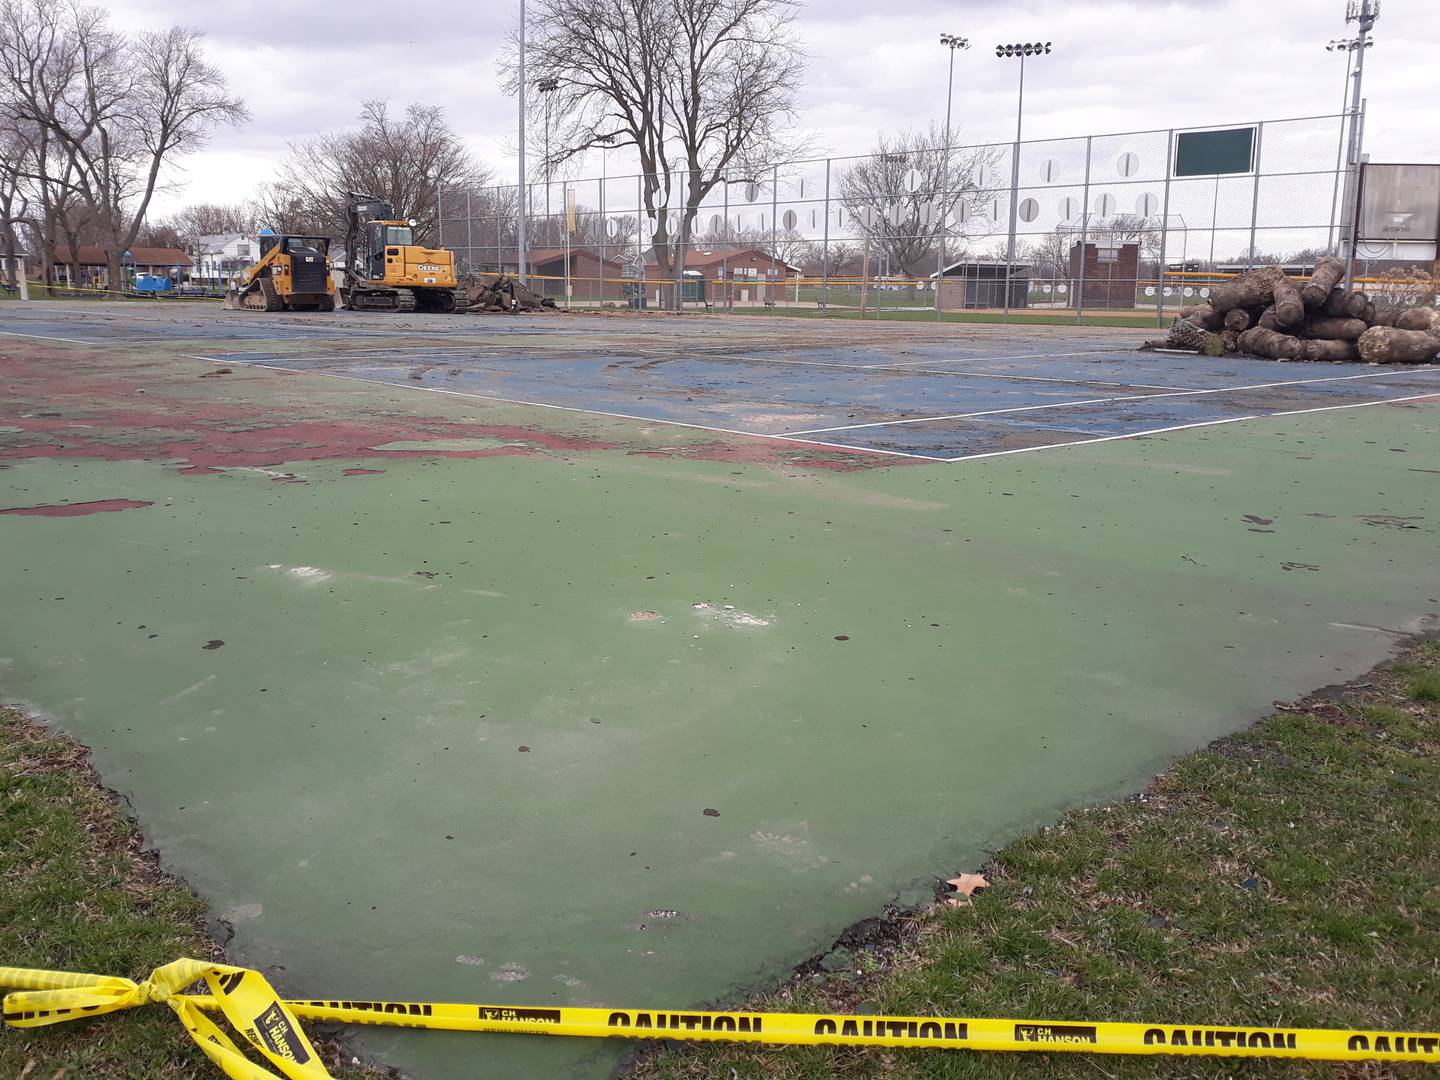 Construction is underway on a $268,840 project with SKI Sealcoating and Maintenance to resurface three internationally-sized tennis courts and add four new pickleball courts at Washington Park in Peru, as well as install new fencing and sidewalks in the area.